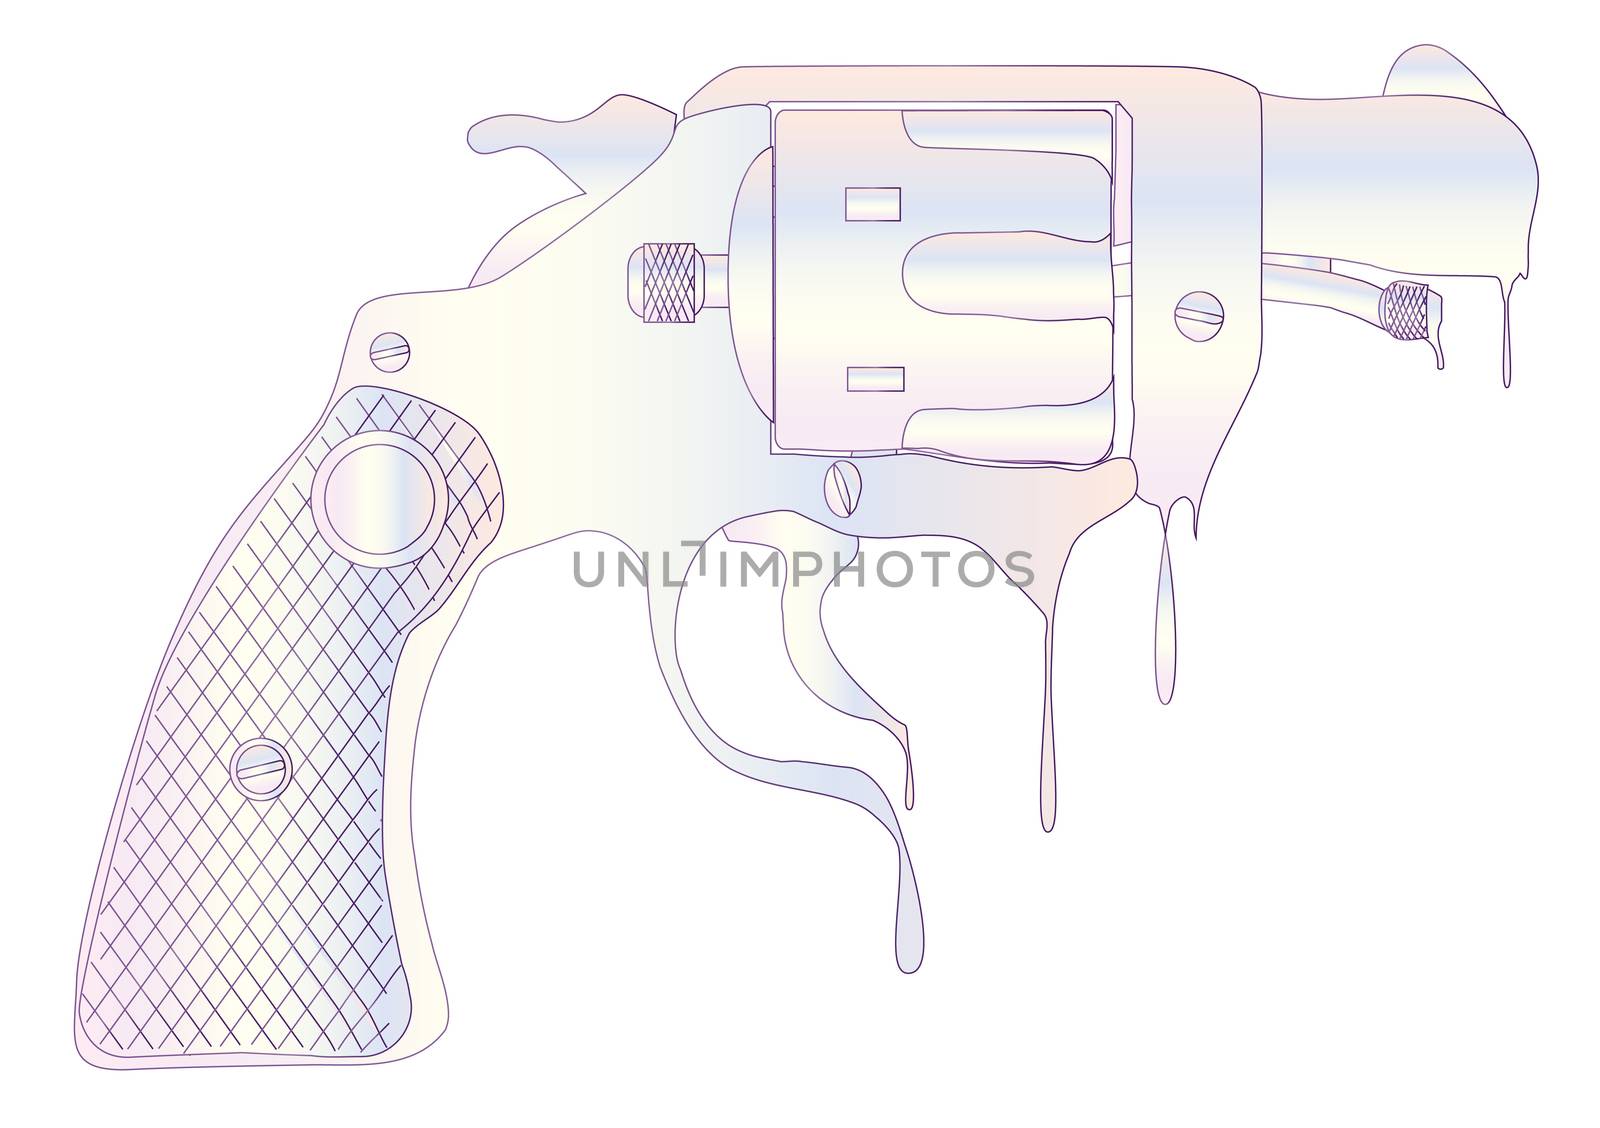 A snub nose revolver made from melting ice